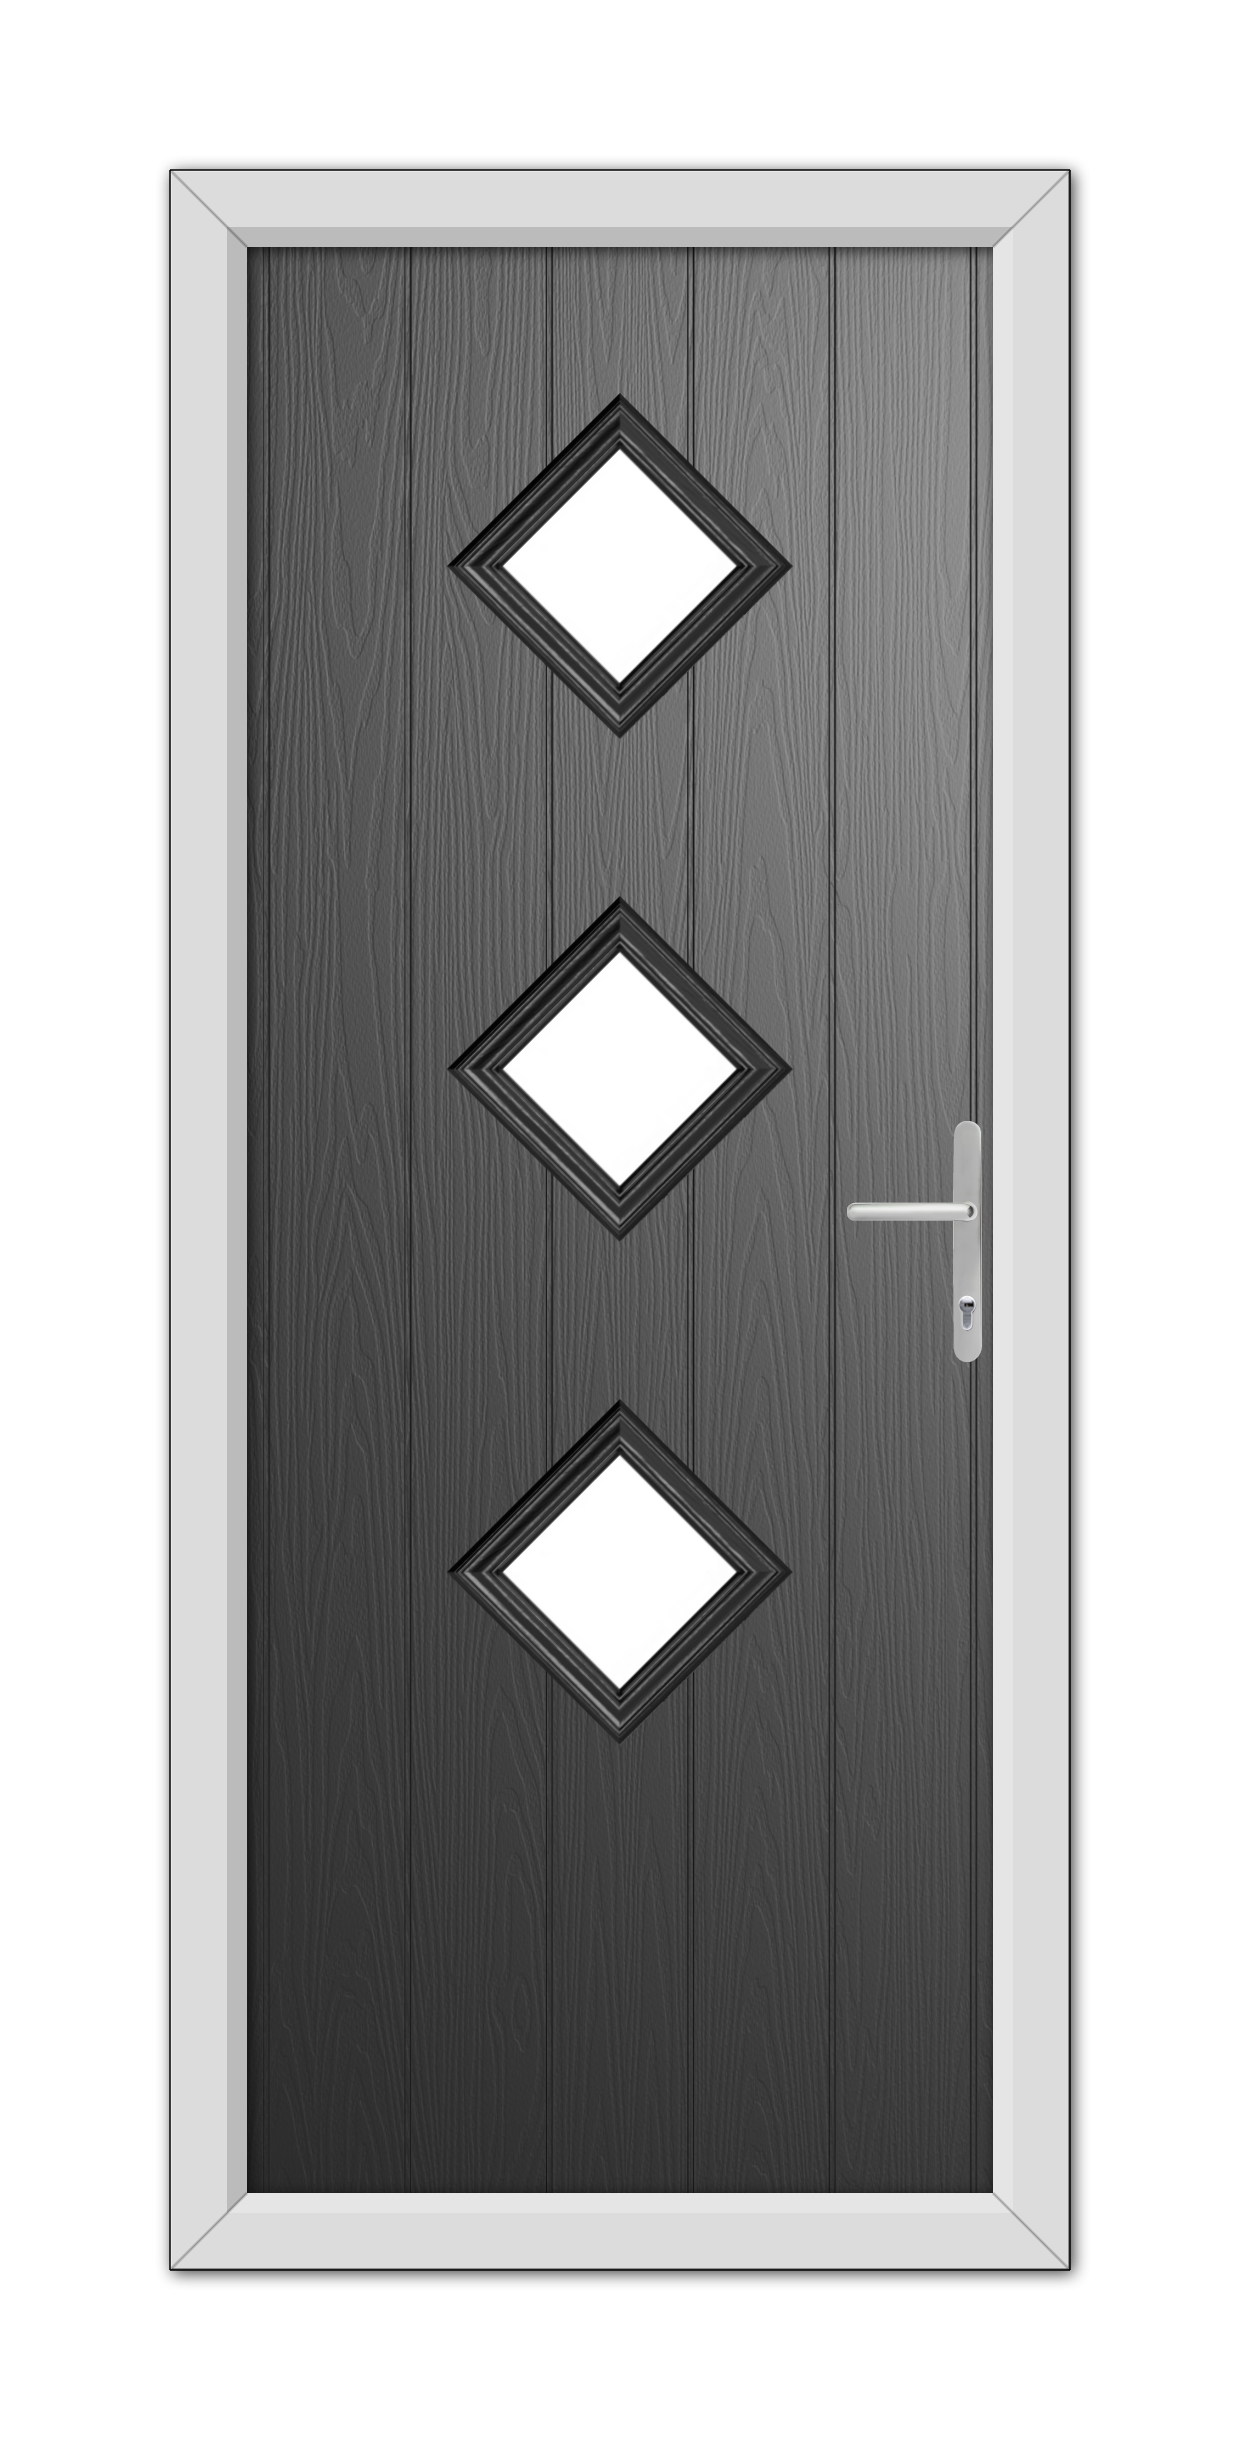 A modern Black Richmond Composite Door 48mm Timber Core with three diamond-shaped windows and a silver handle, set in a white frame.